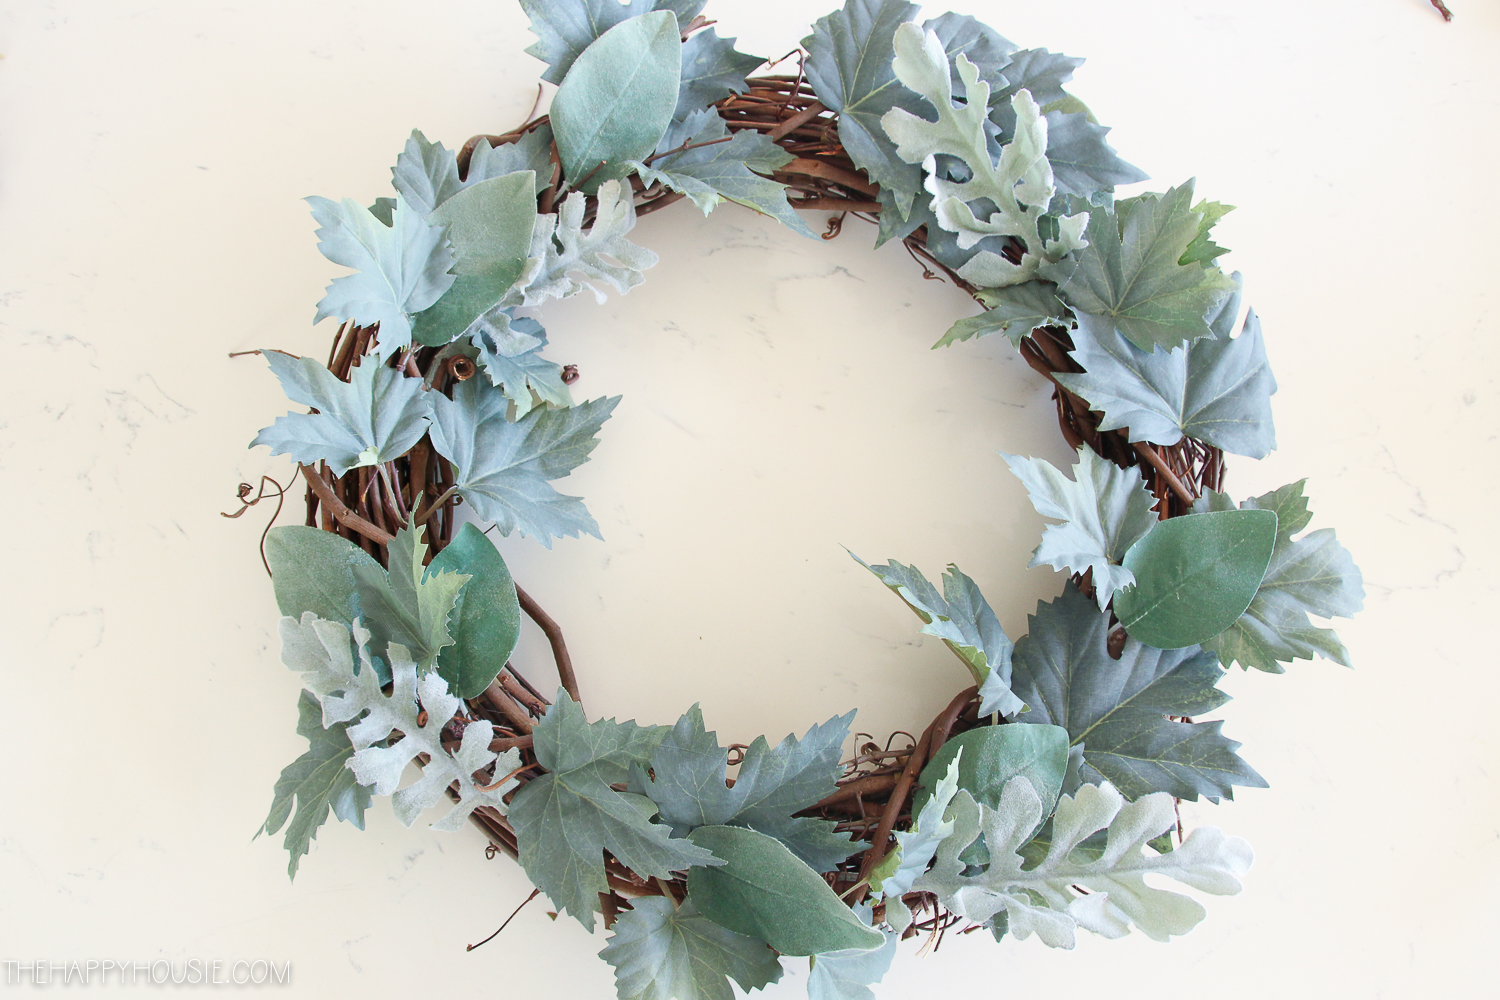 The leaves attached to the wreath.